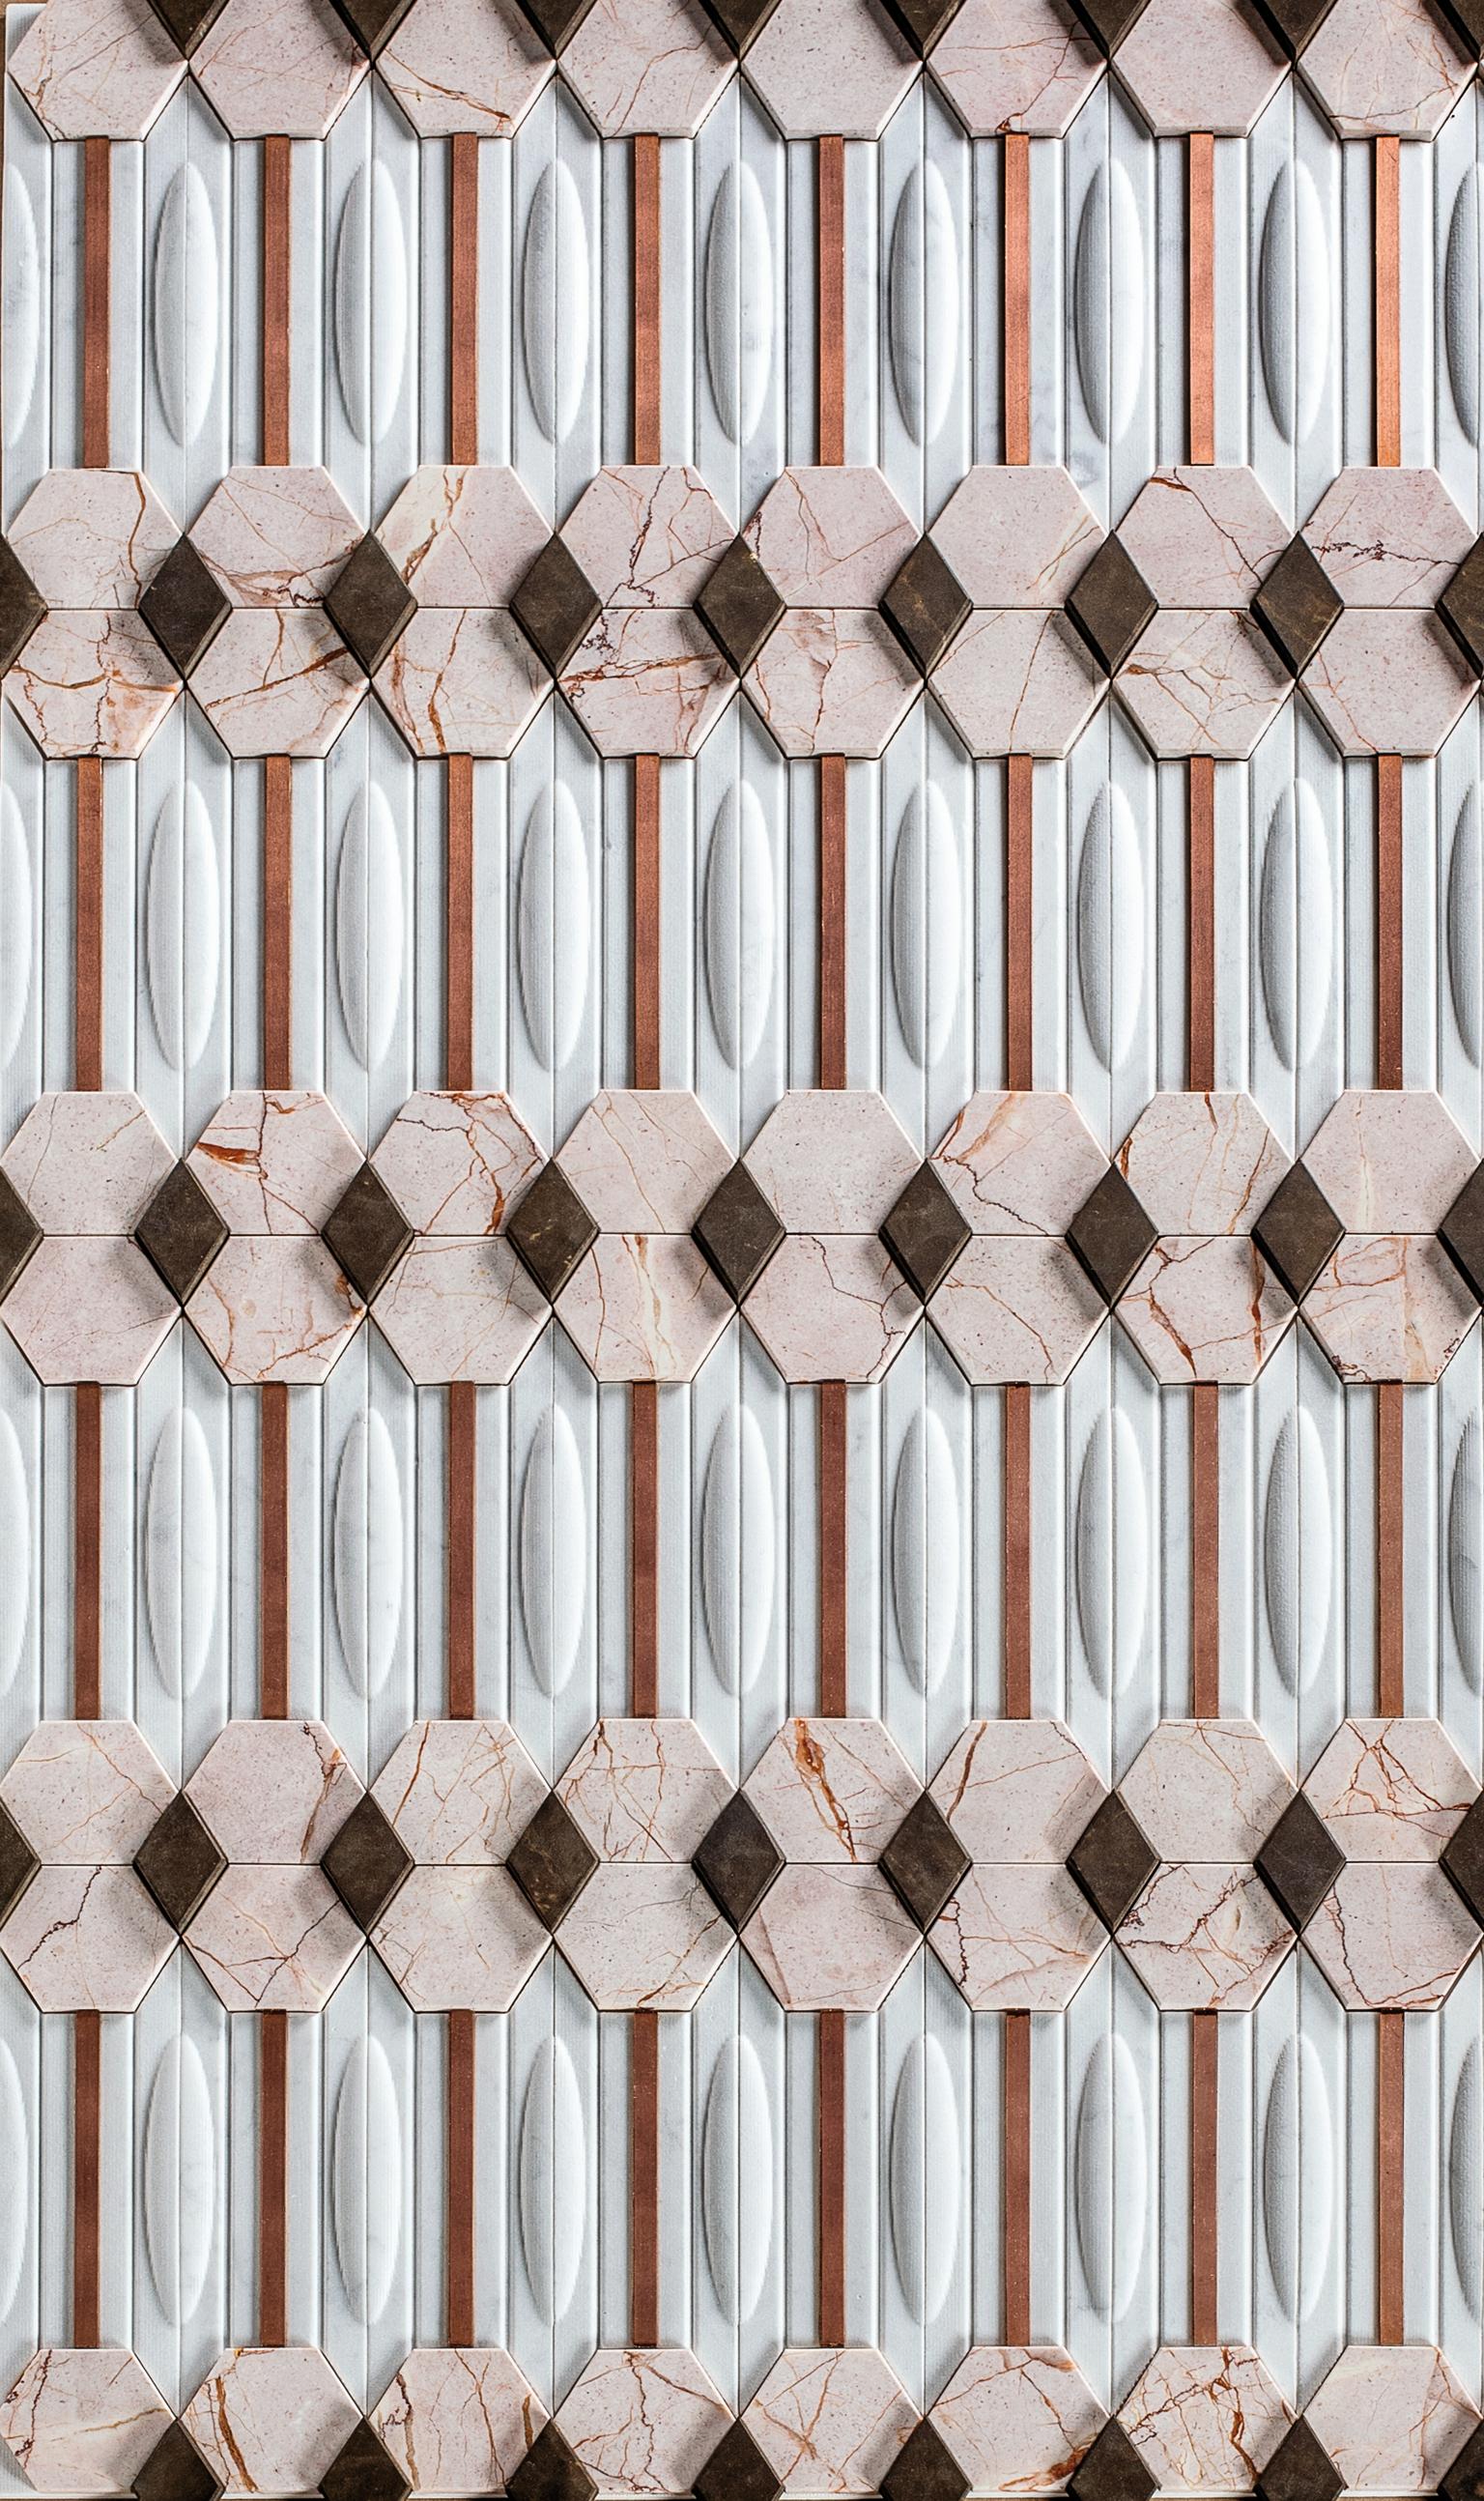 BYZAS 
Wall decor
Dimensions: Single tile 30 x 16 x 2 cm
Materials: Bas-relief in Bianco Carrara marble, hexagons in pink marble polished finish, rhombus in pietra pece honed finish and copper strip satin finish

   